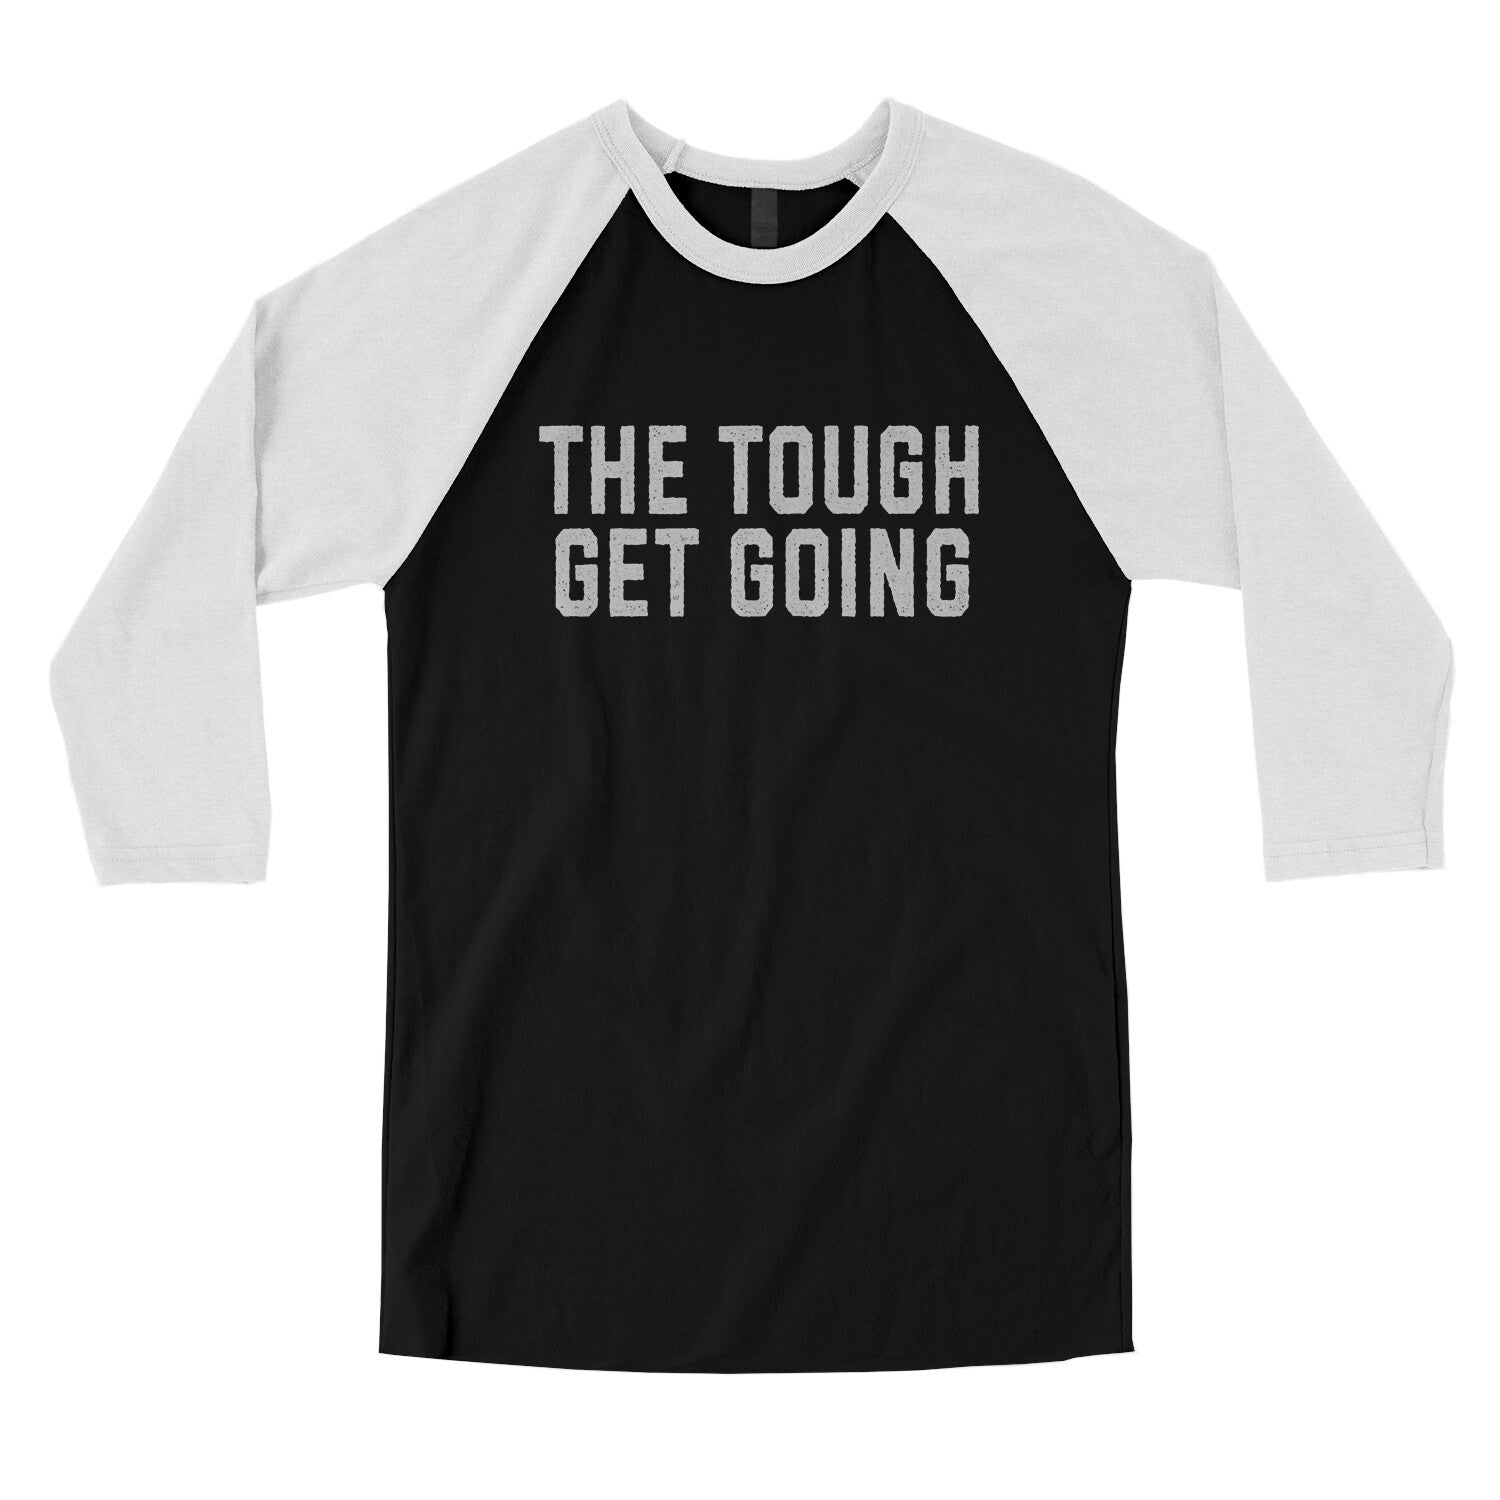 The Tough Get Going in Black with White Color